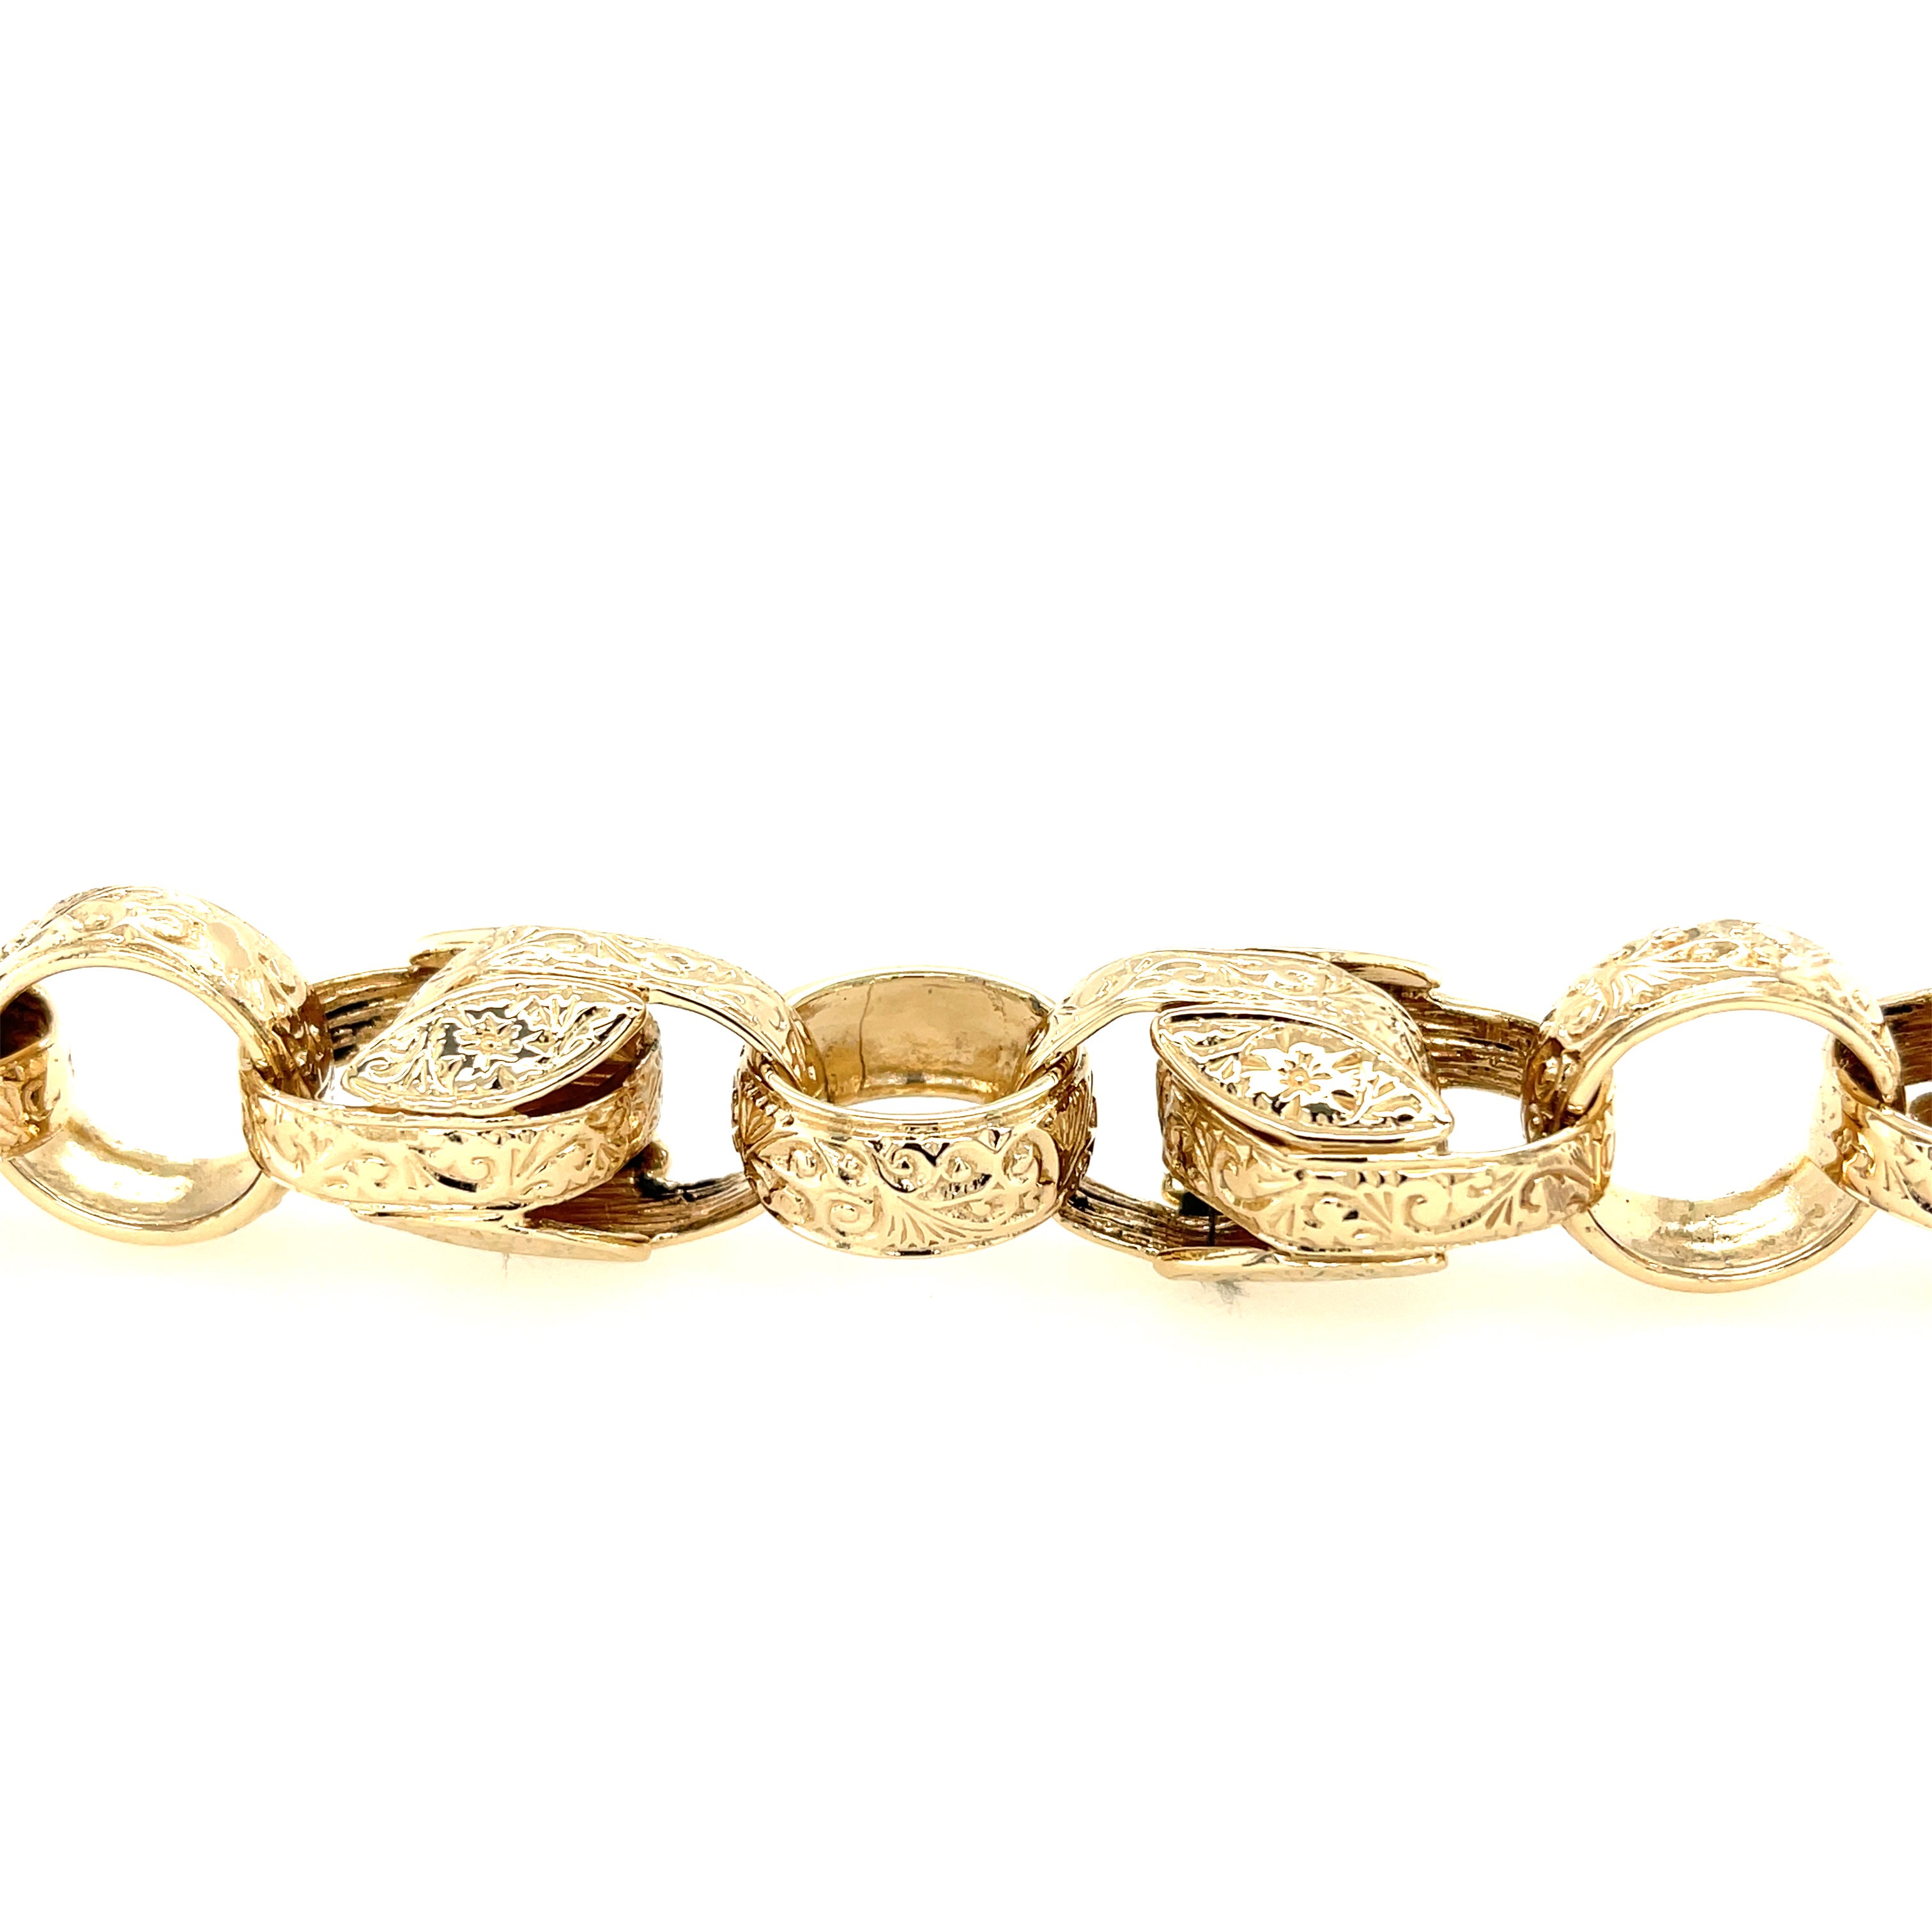 9ct Yellow Gold 10 Inch Heavy Patterned Tulip & Blecher Link Bracelet - 95.48g SOLD